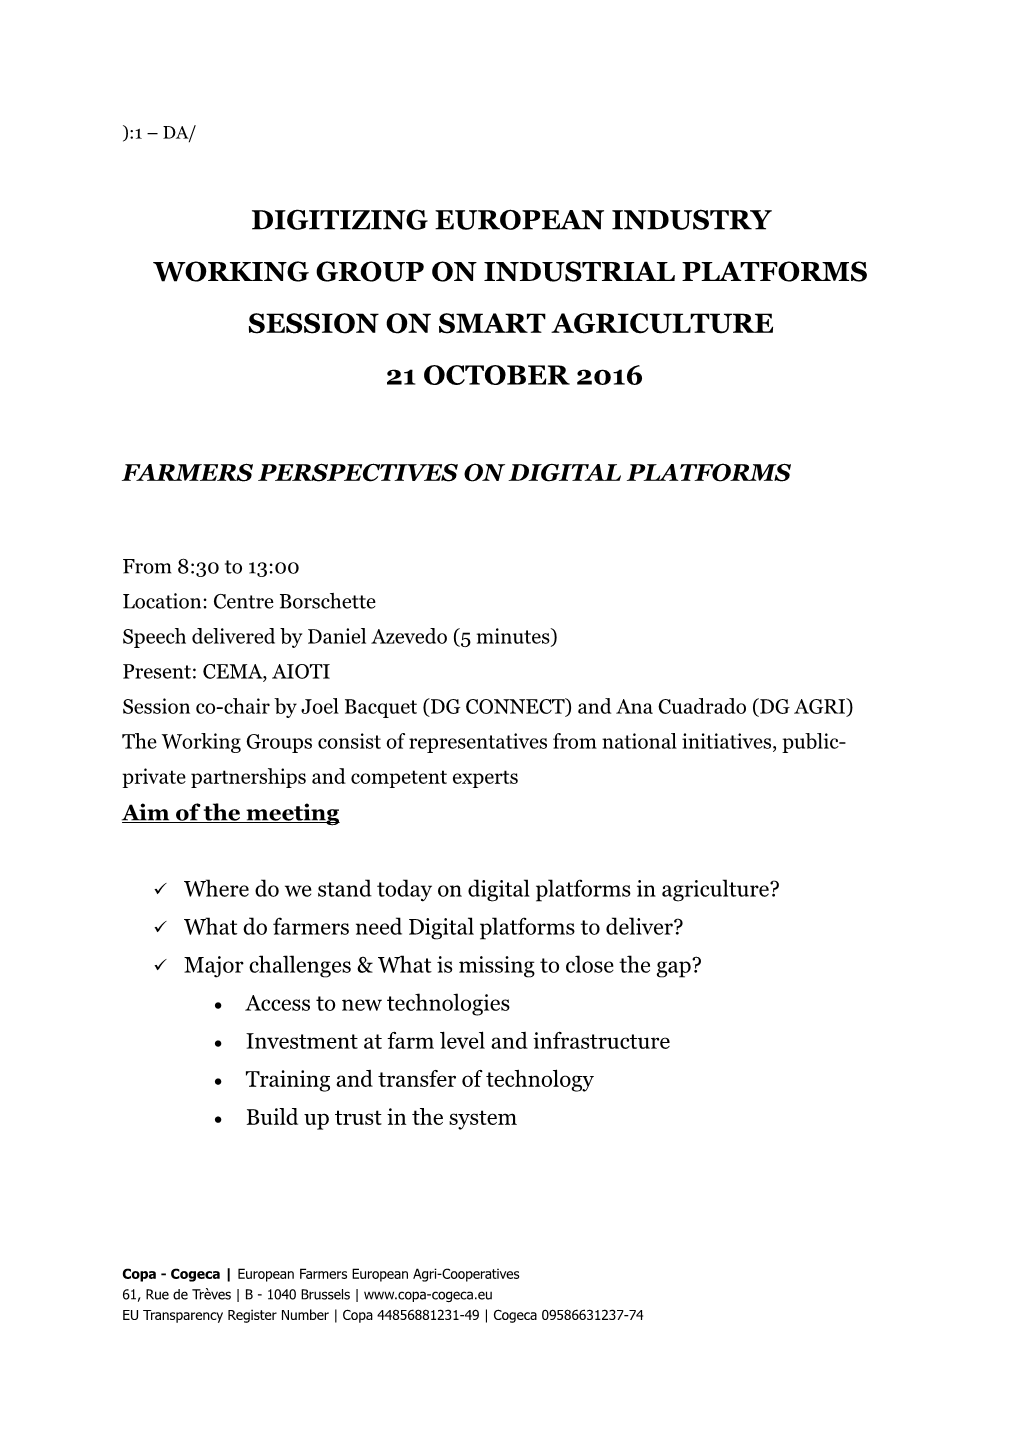 Working Group on Industrial Platforms